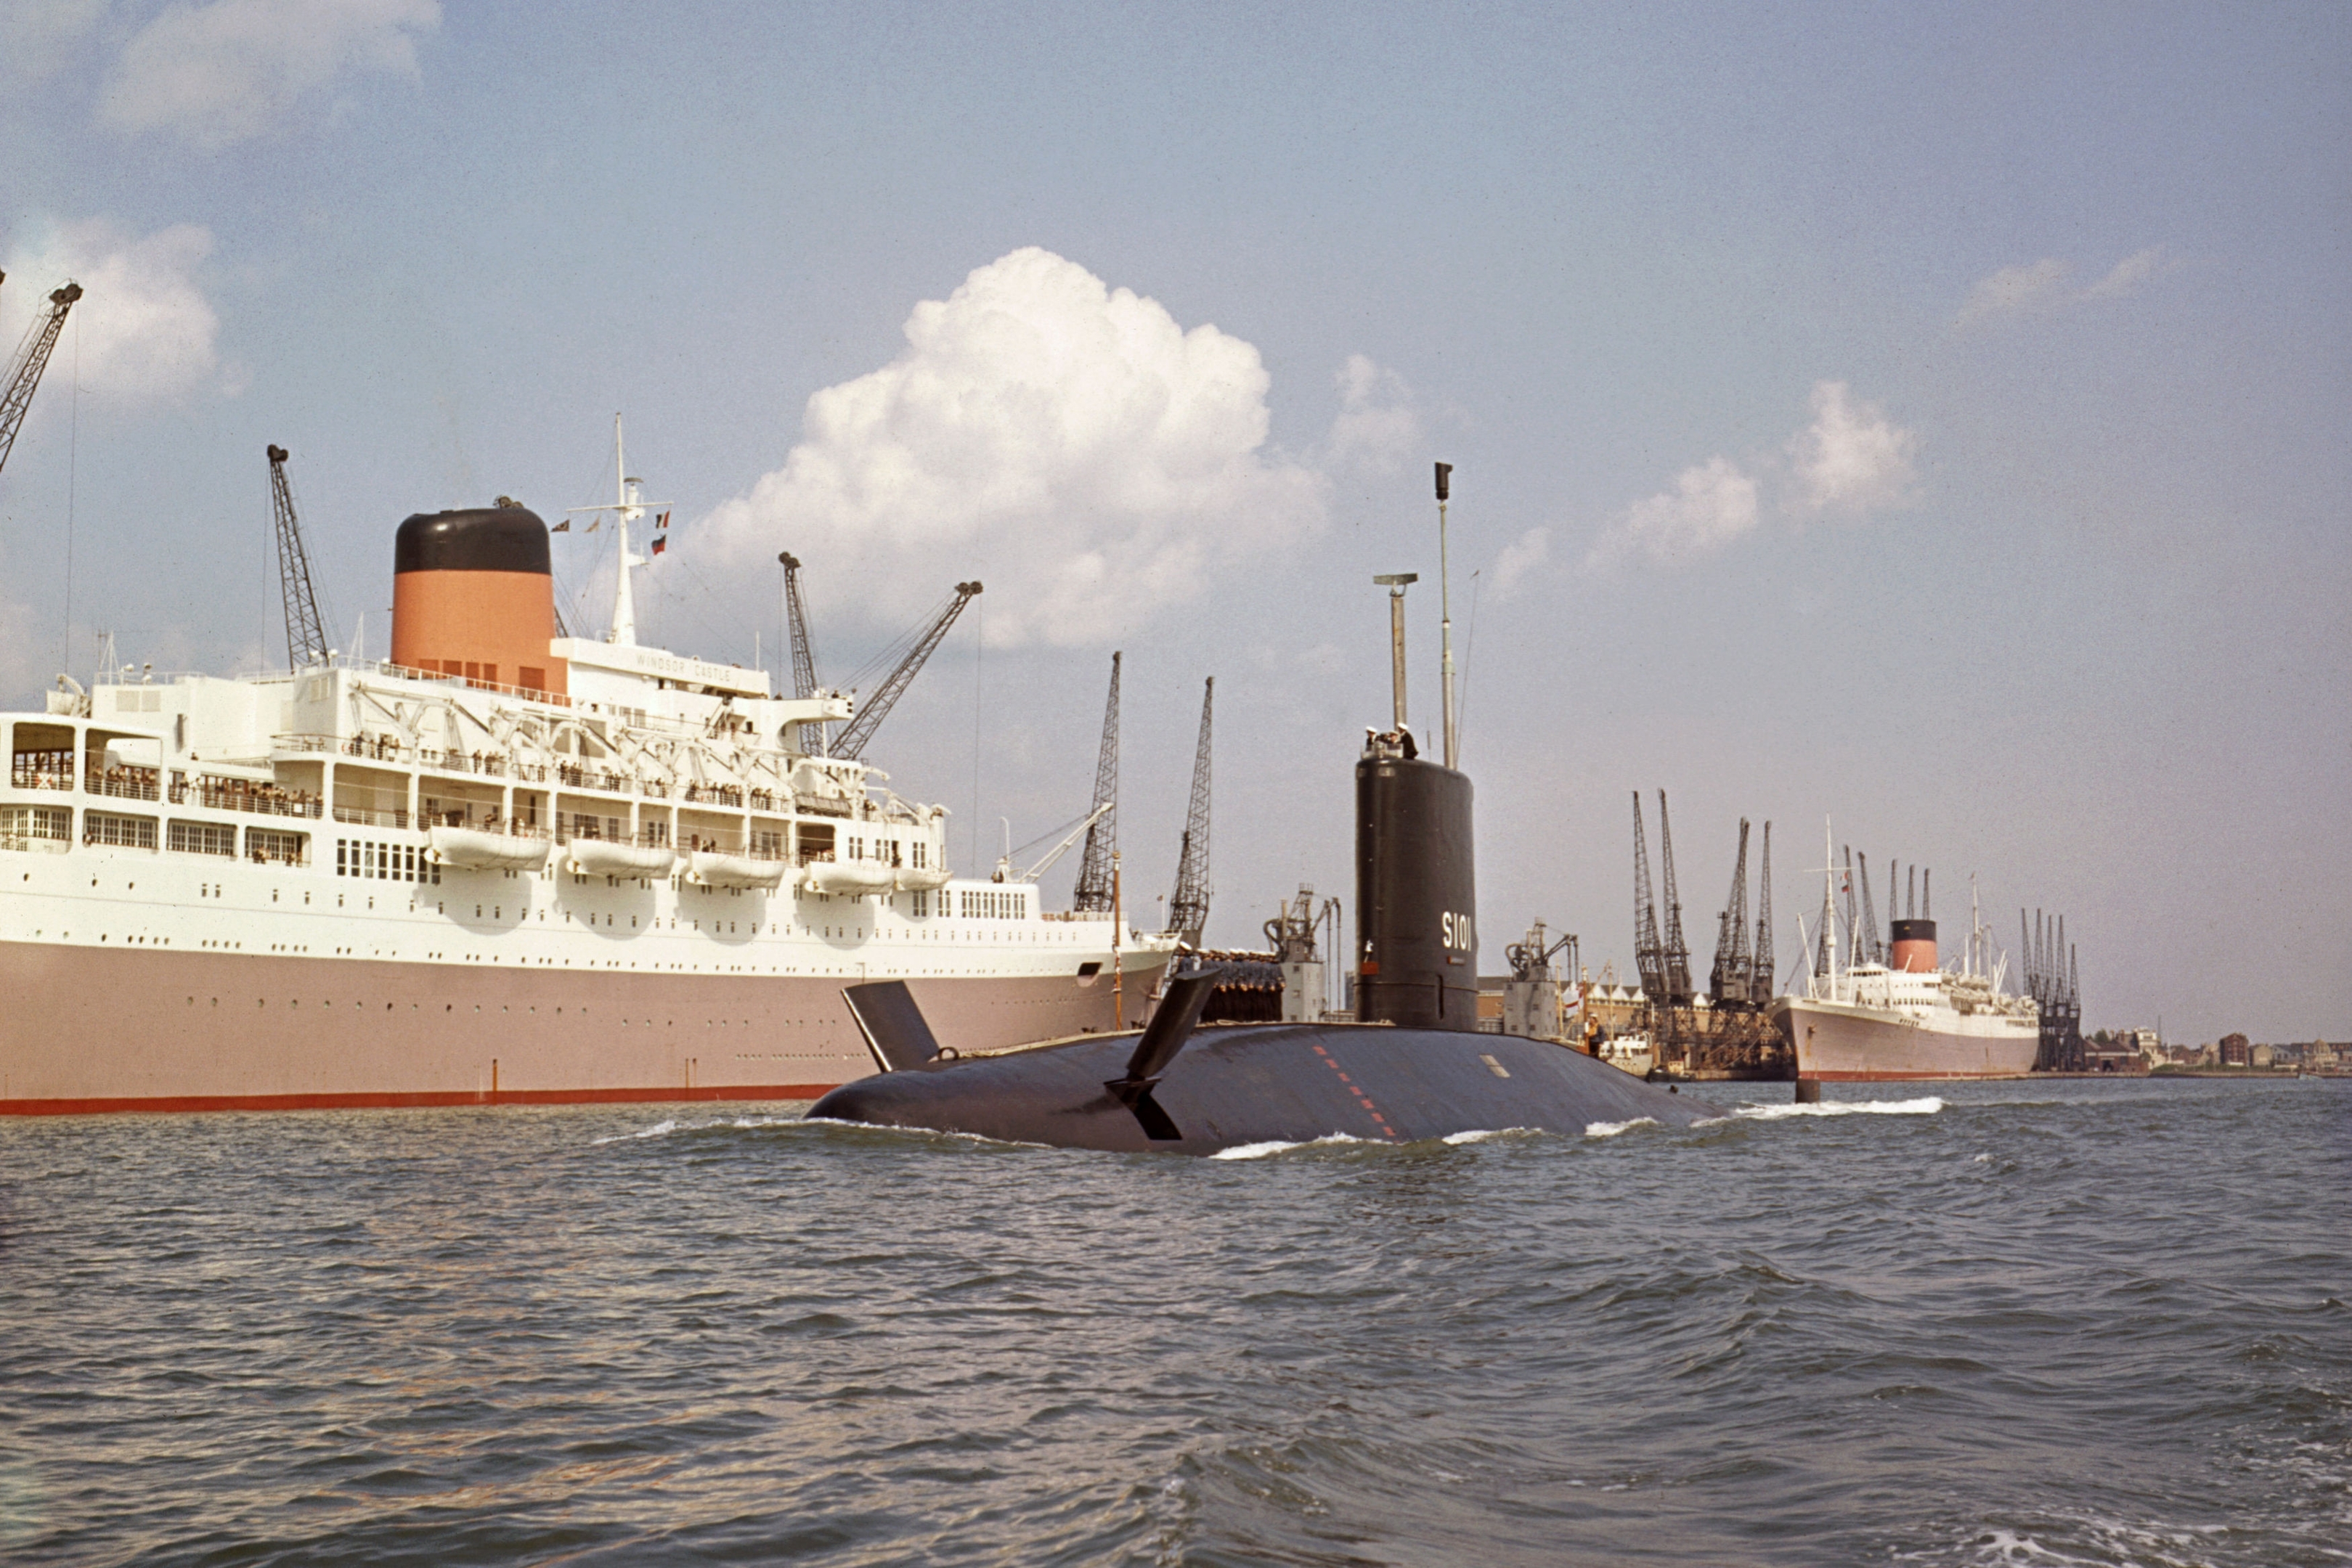 File photo dated 19/05/65 of Britain's first nuclear-powered submarine HMS Dreadnought during a visit to Southampton. The UK's new nuclear-powered submarine is to be named HMS Dreadnought, it was announced today to coincide with the anniversary of the Navy's victory at the Battle of Trafalgar. PRESS ASSOCIATION Photo. Issue date: Friday October 21, 2016. See PA story DEFENCE Navy Dreadnought. Photo credit should read: PA Wire